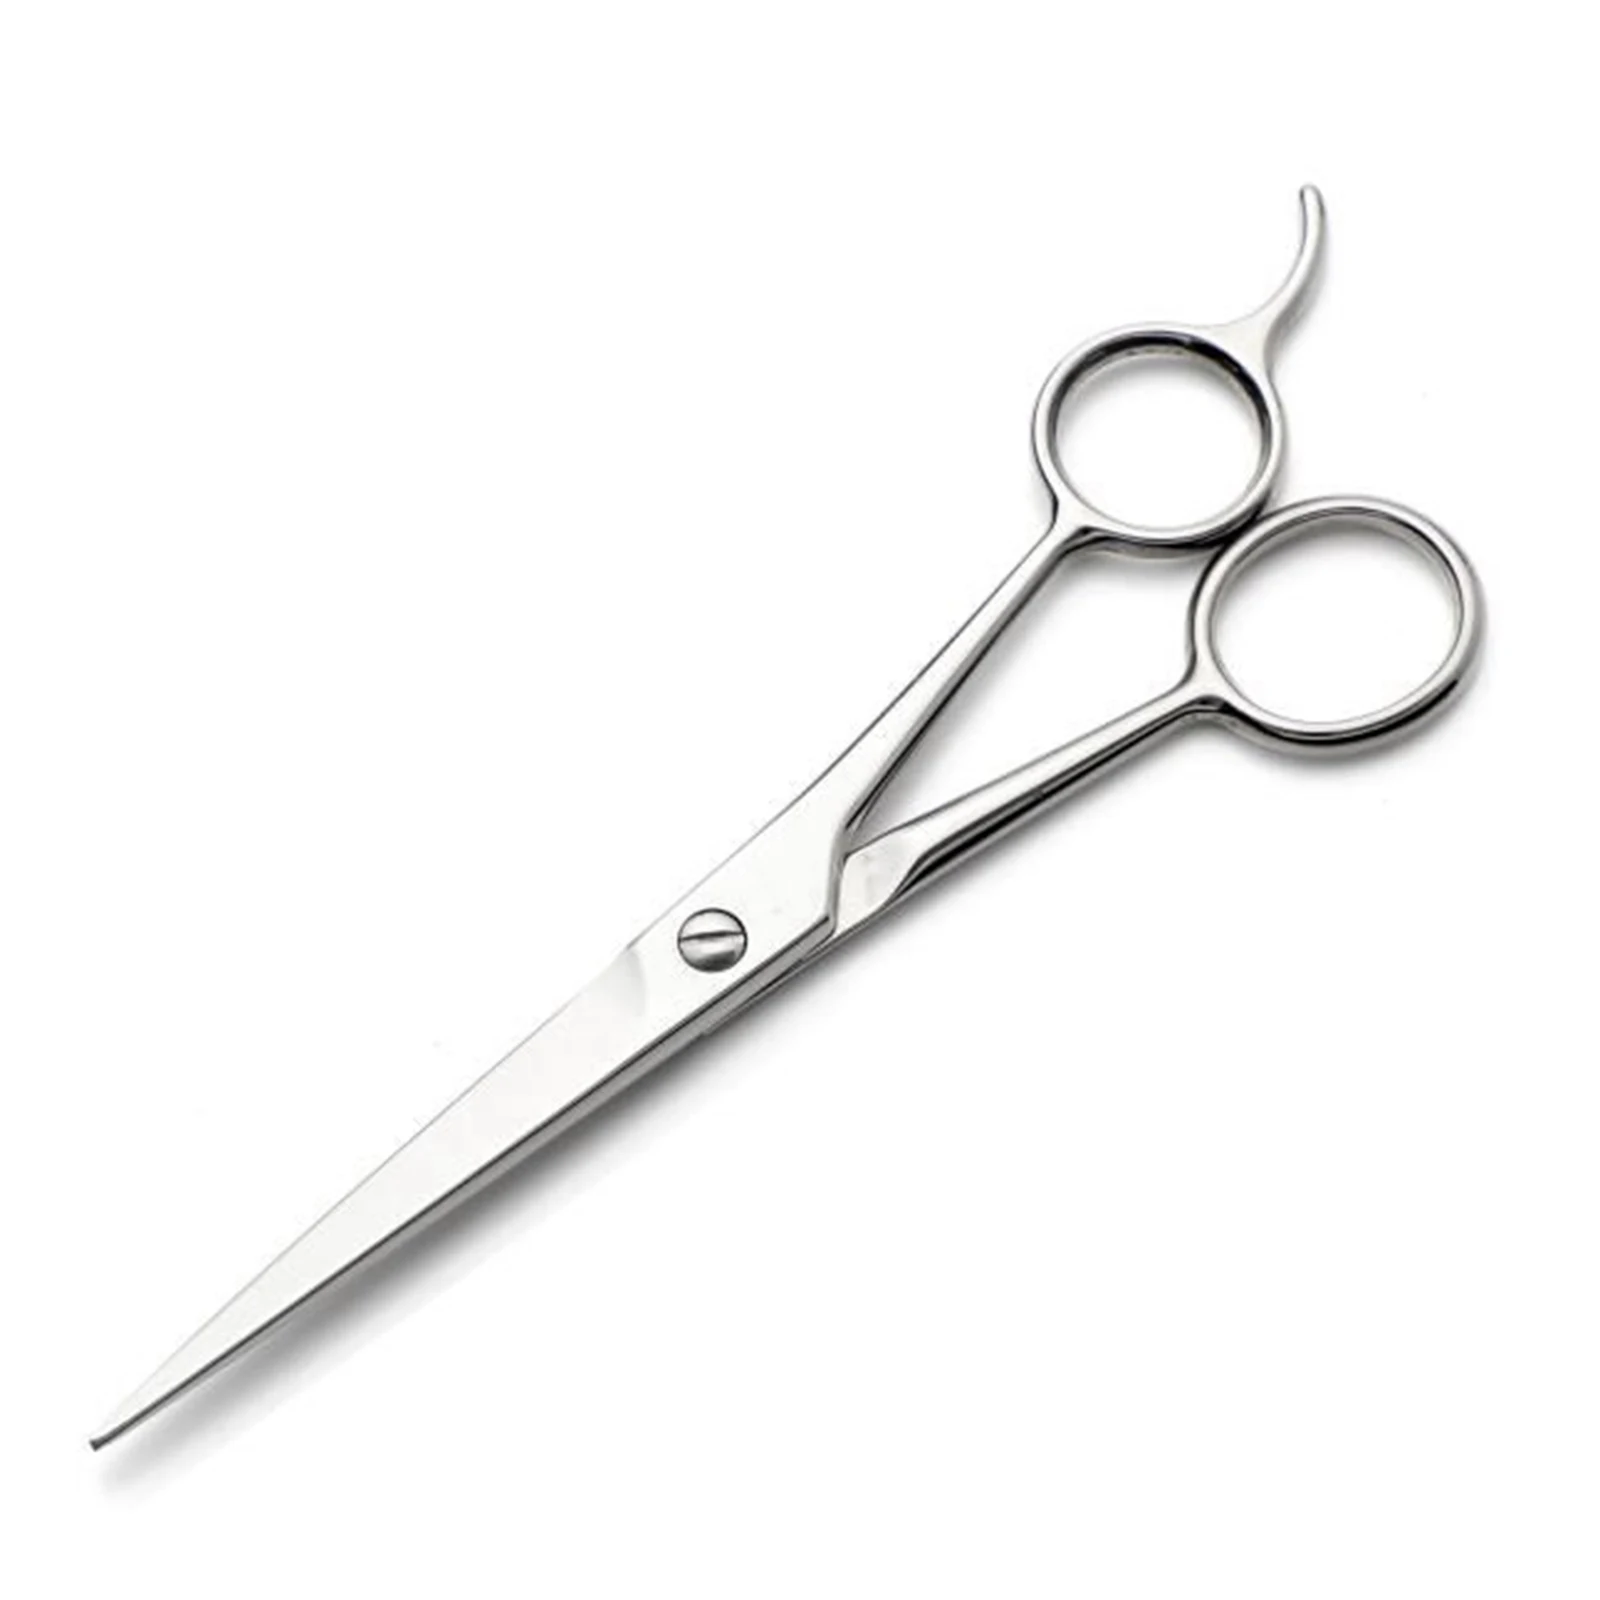 Hair Scissors Cutting Shears Salon Professional Barber Hair Cutting Thinning Hairdressing Styling Tool Hairdressing Comb